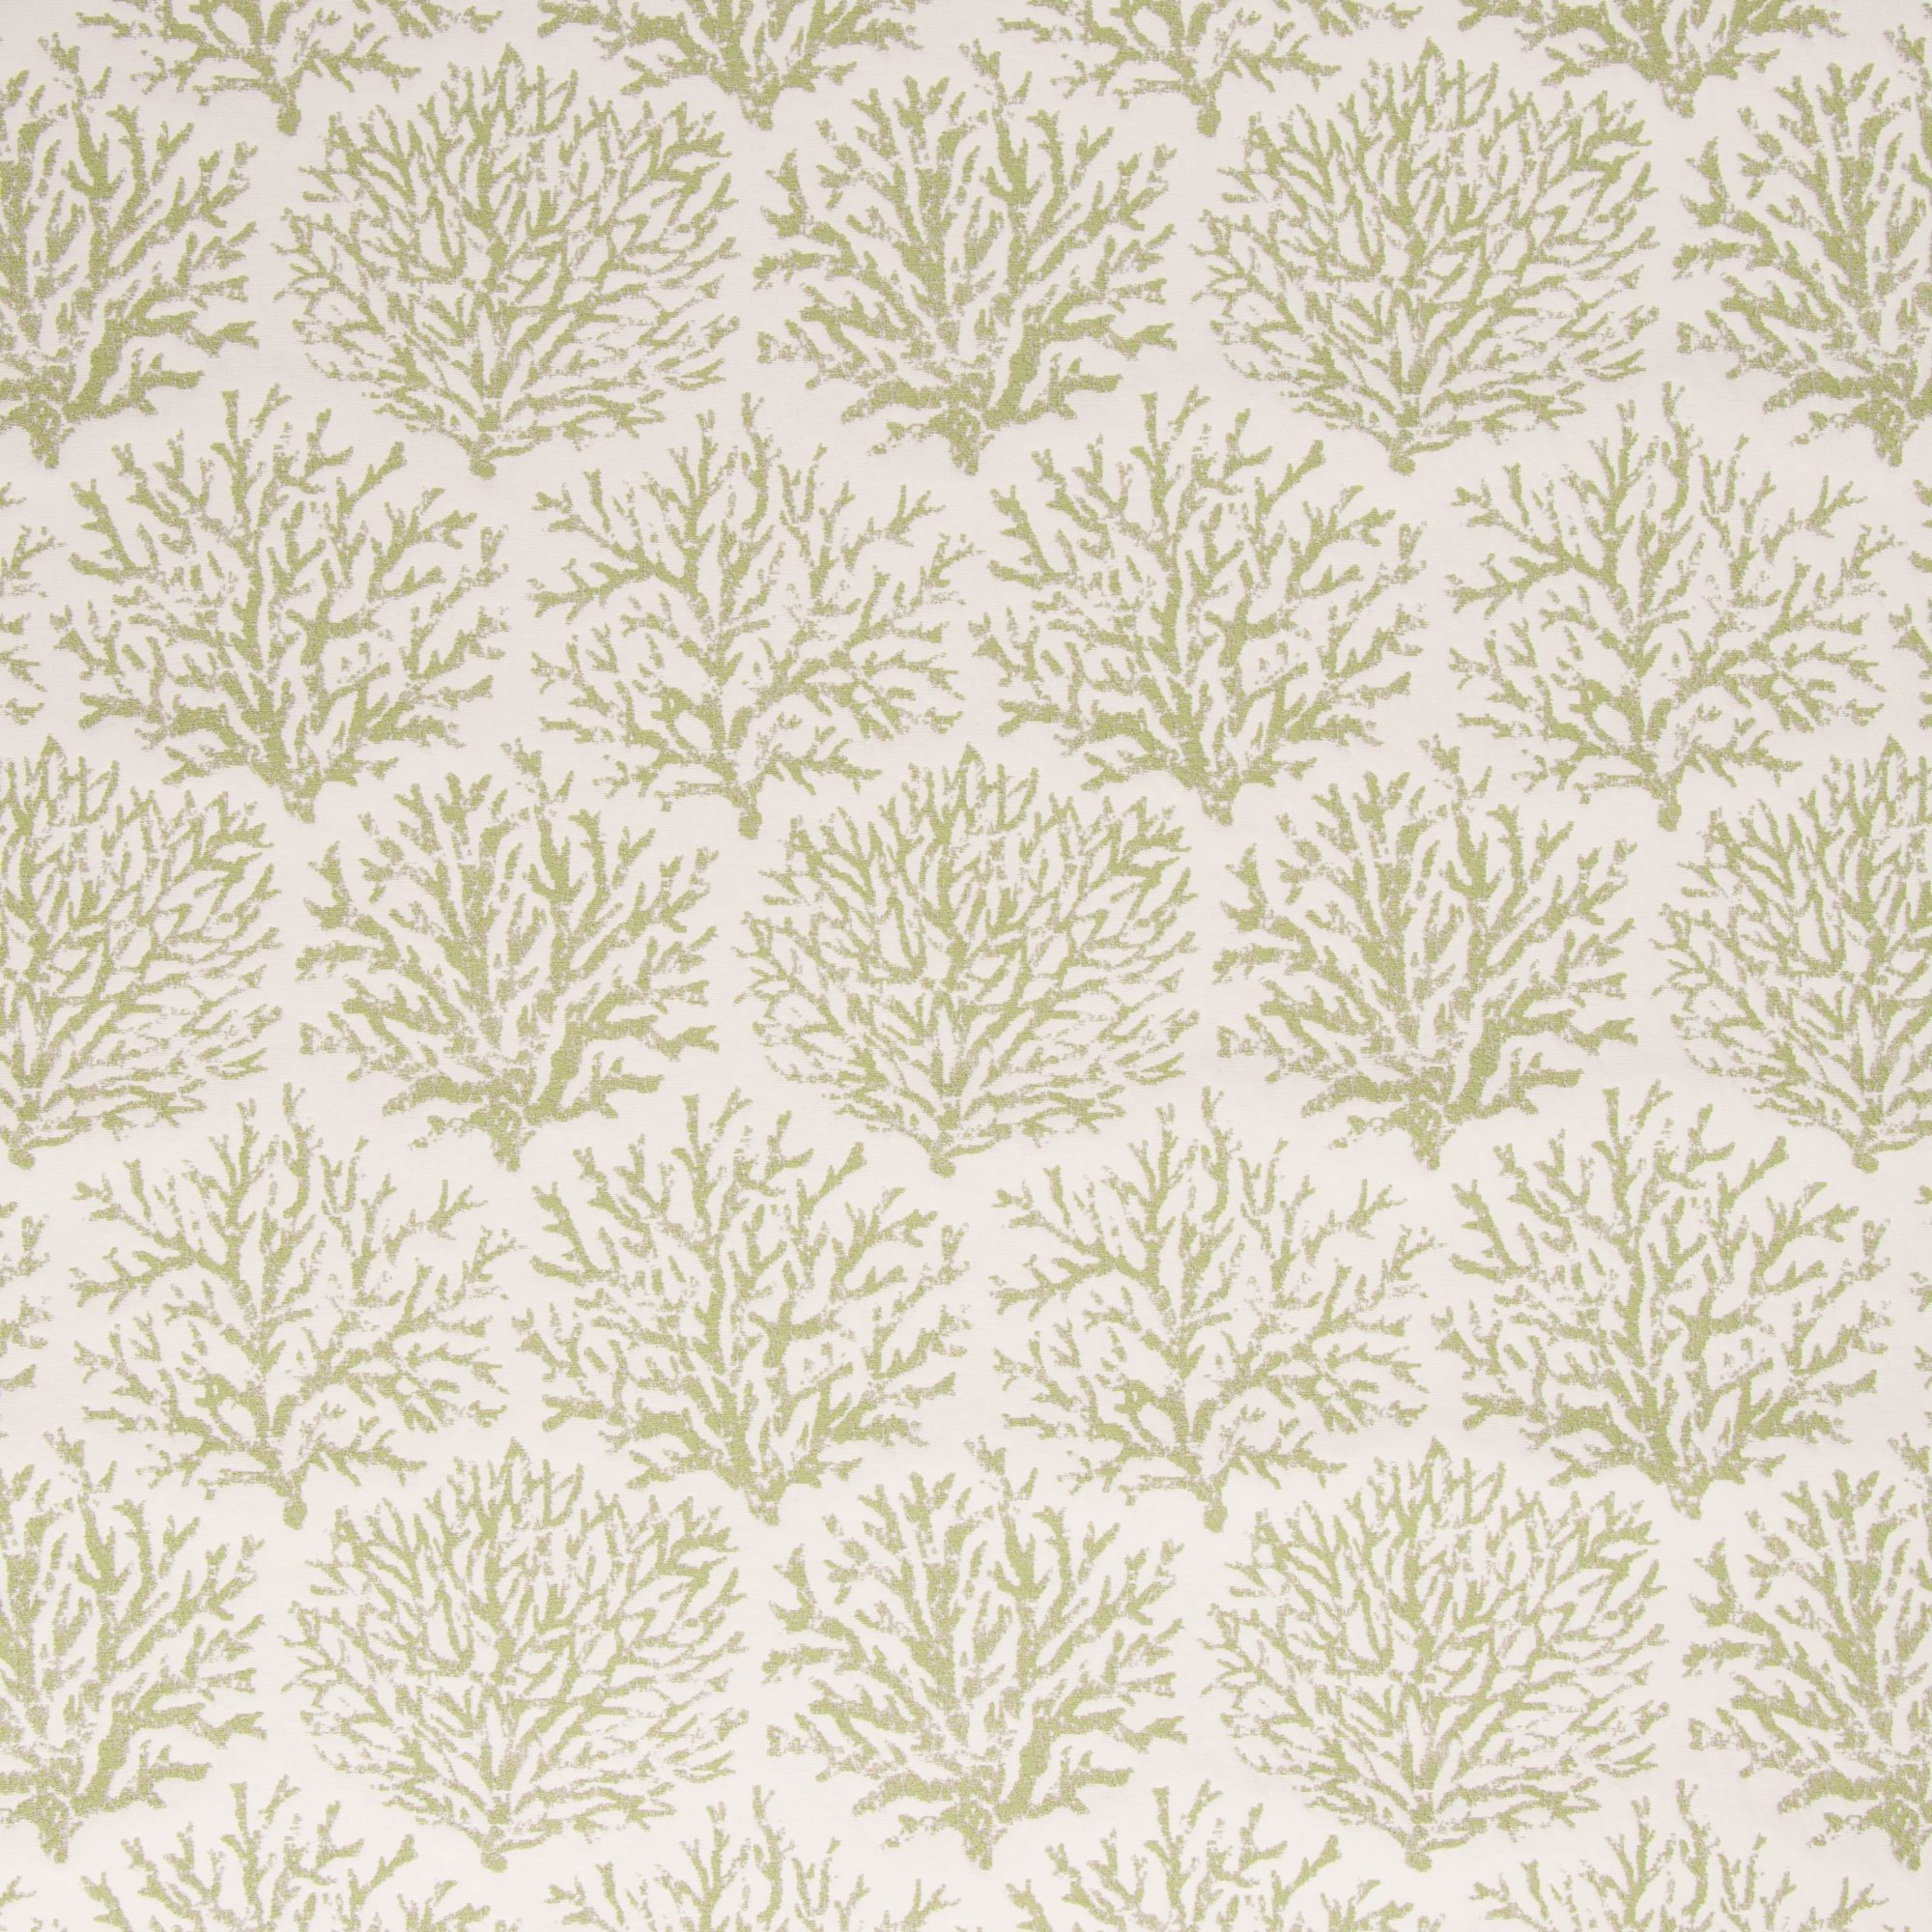 Cut yardage from Bella Dura and Bella Dura Home in the pattern Coraline and color Meadow.